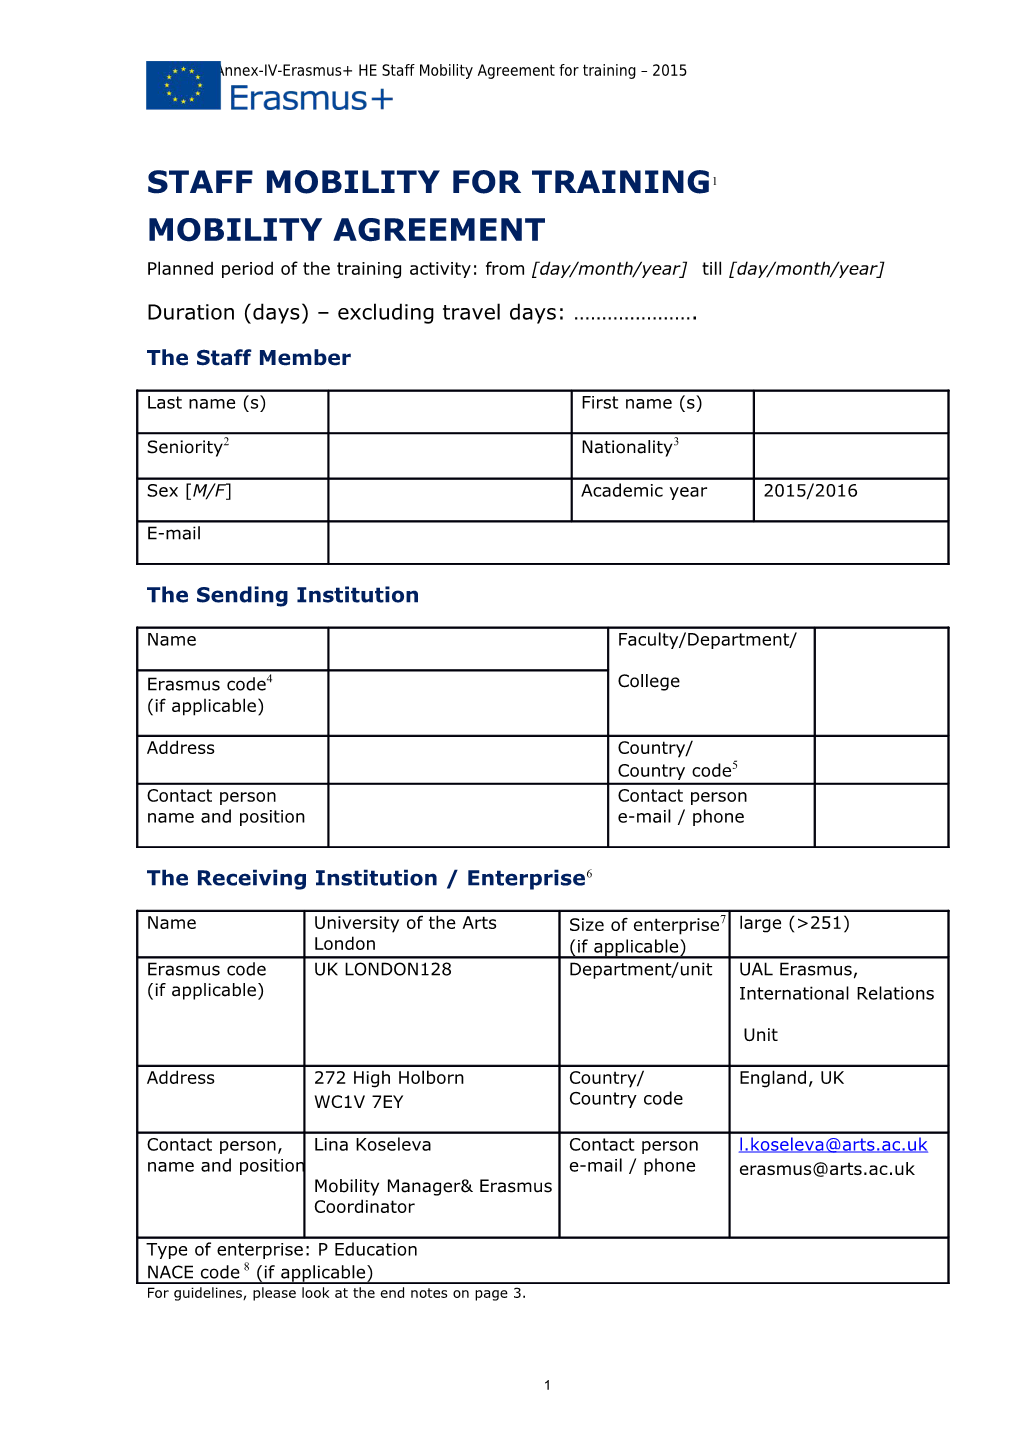 Gfna-II-C-Annex-IV-Erasmus+ HE Staff Mobility Agreement for Training 2015